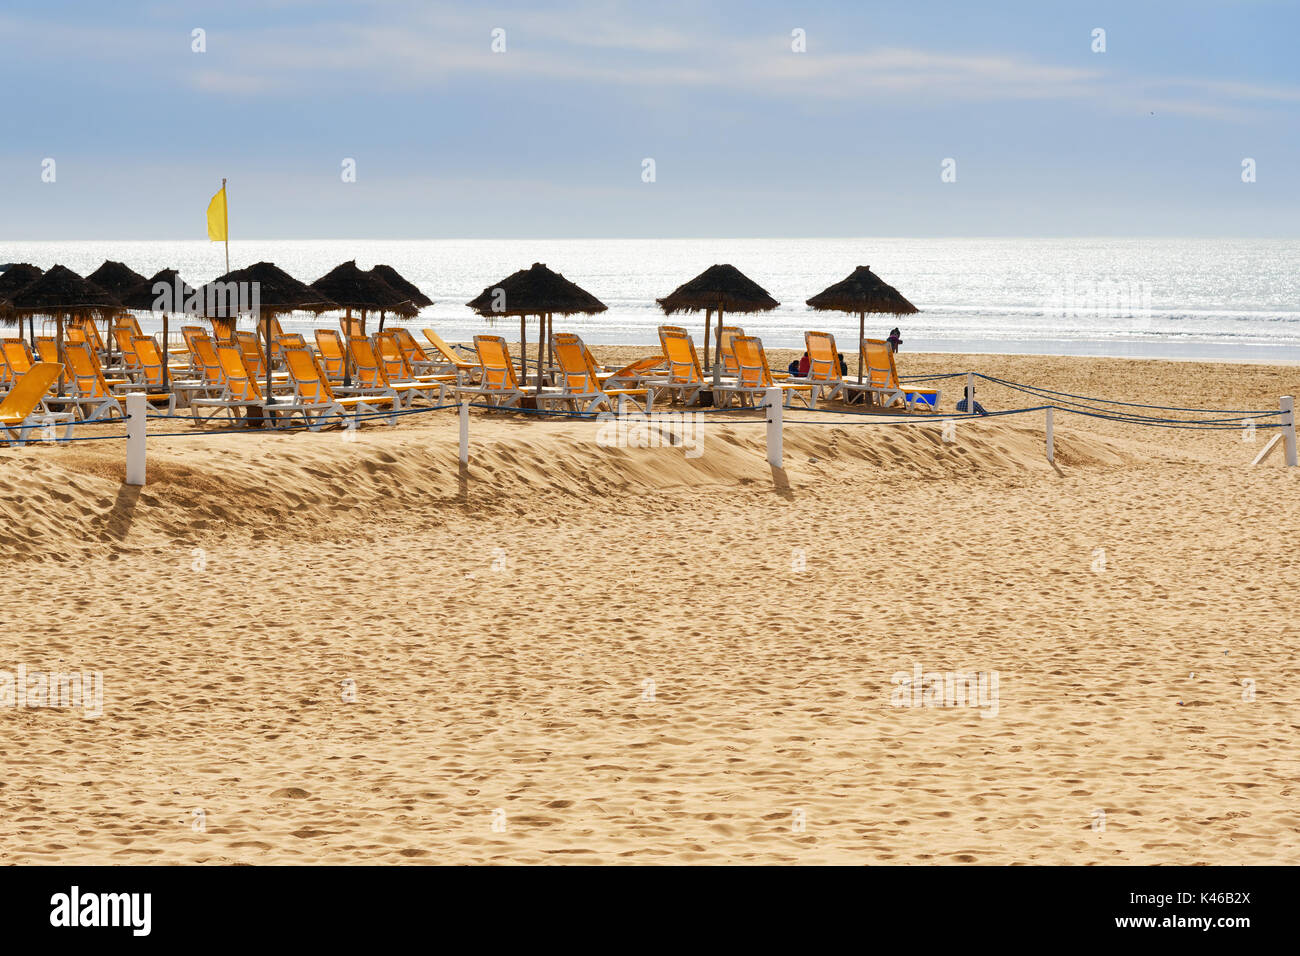 Umbrellas and chaise lounges on beach in Agadir. Morocco Stock Photo